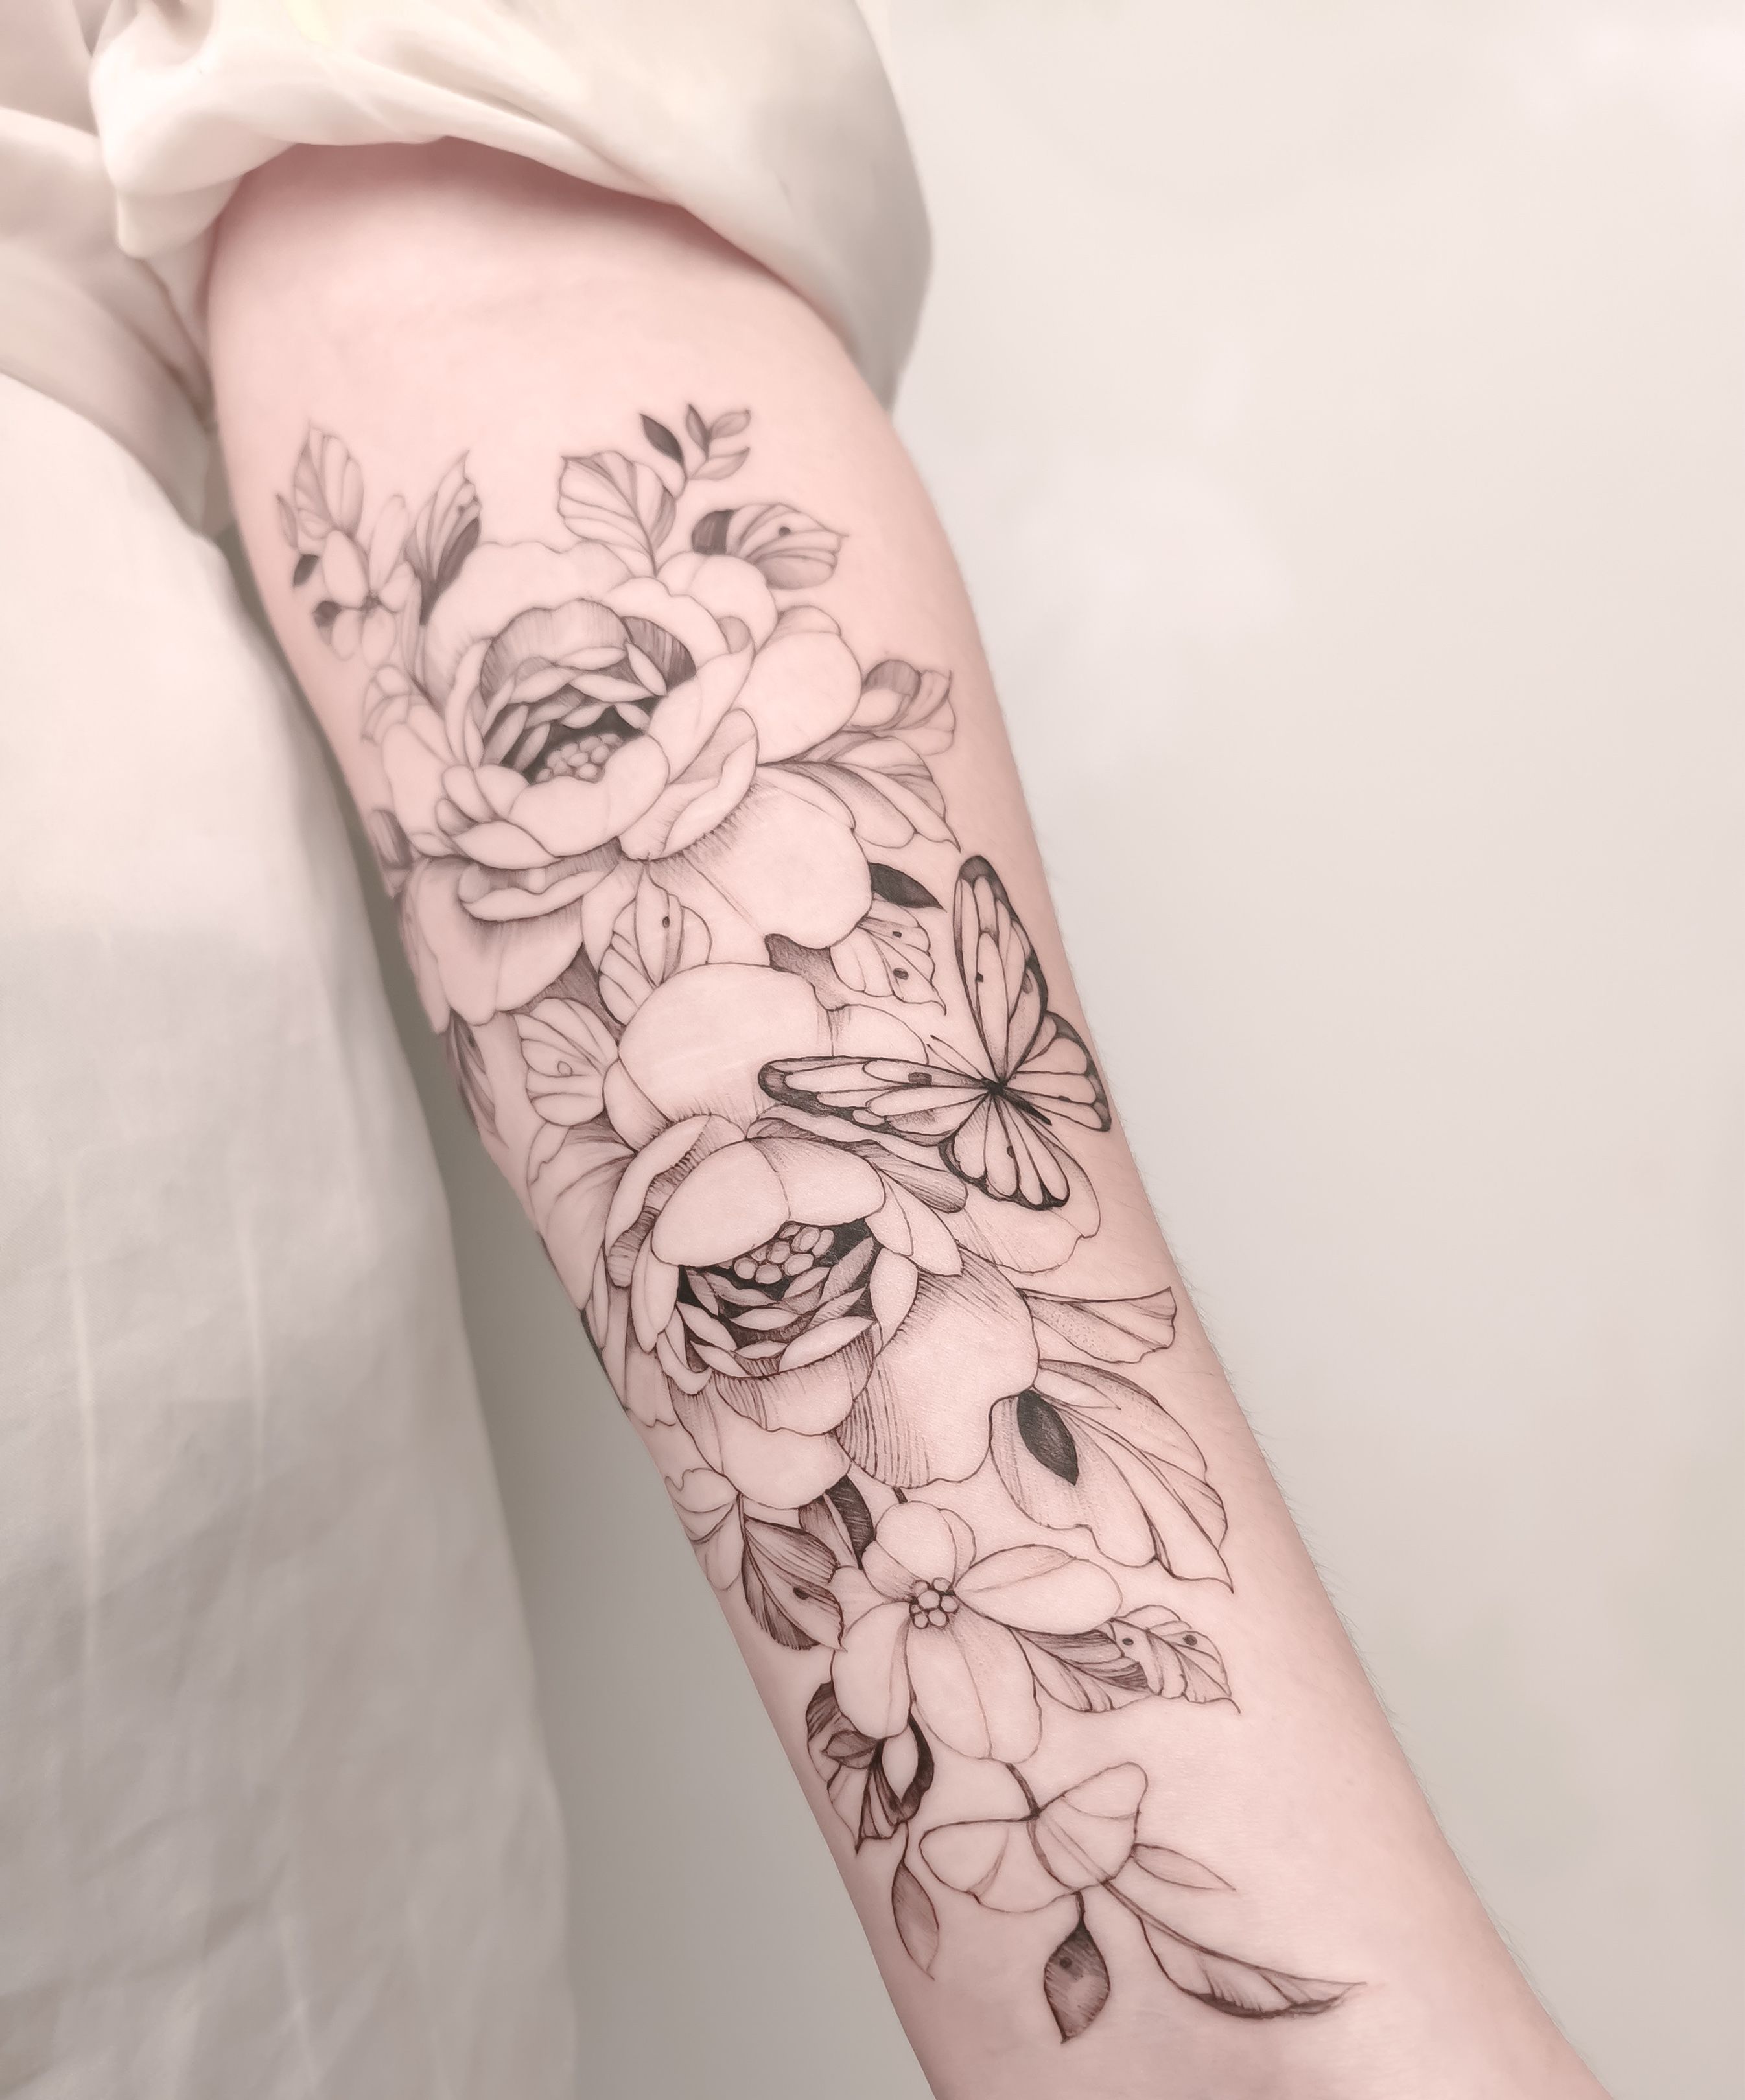 Tattoo uploaded by Wiwi Schrøder • Floral scar cover